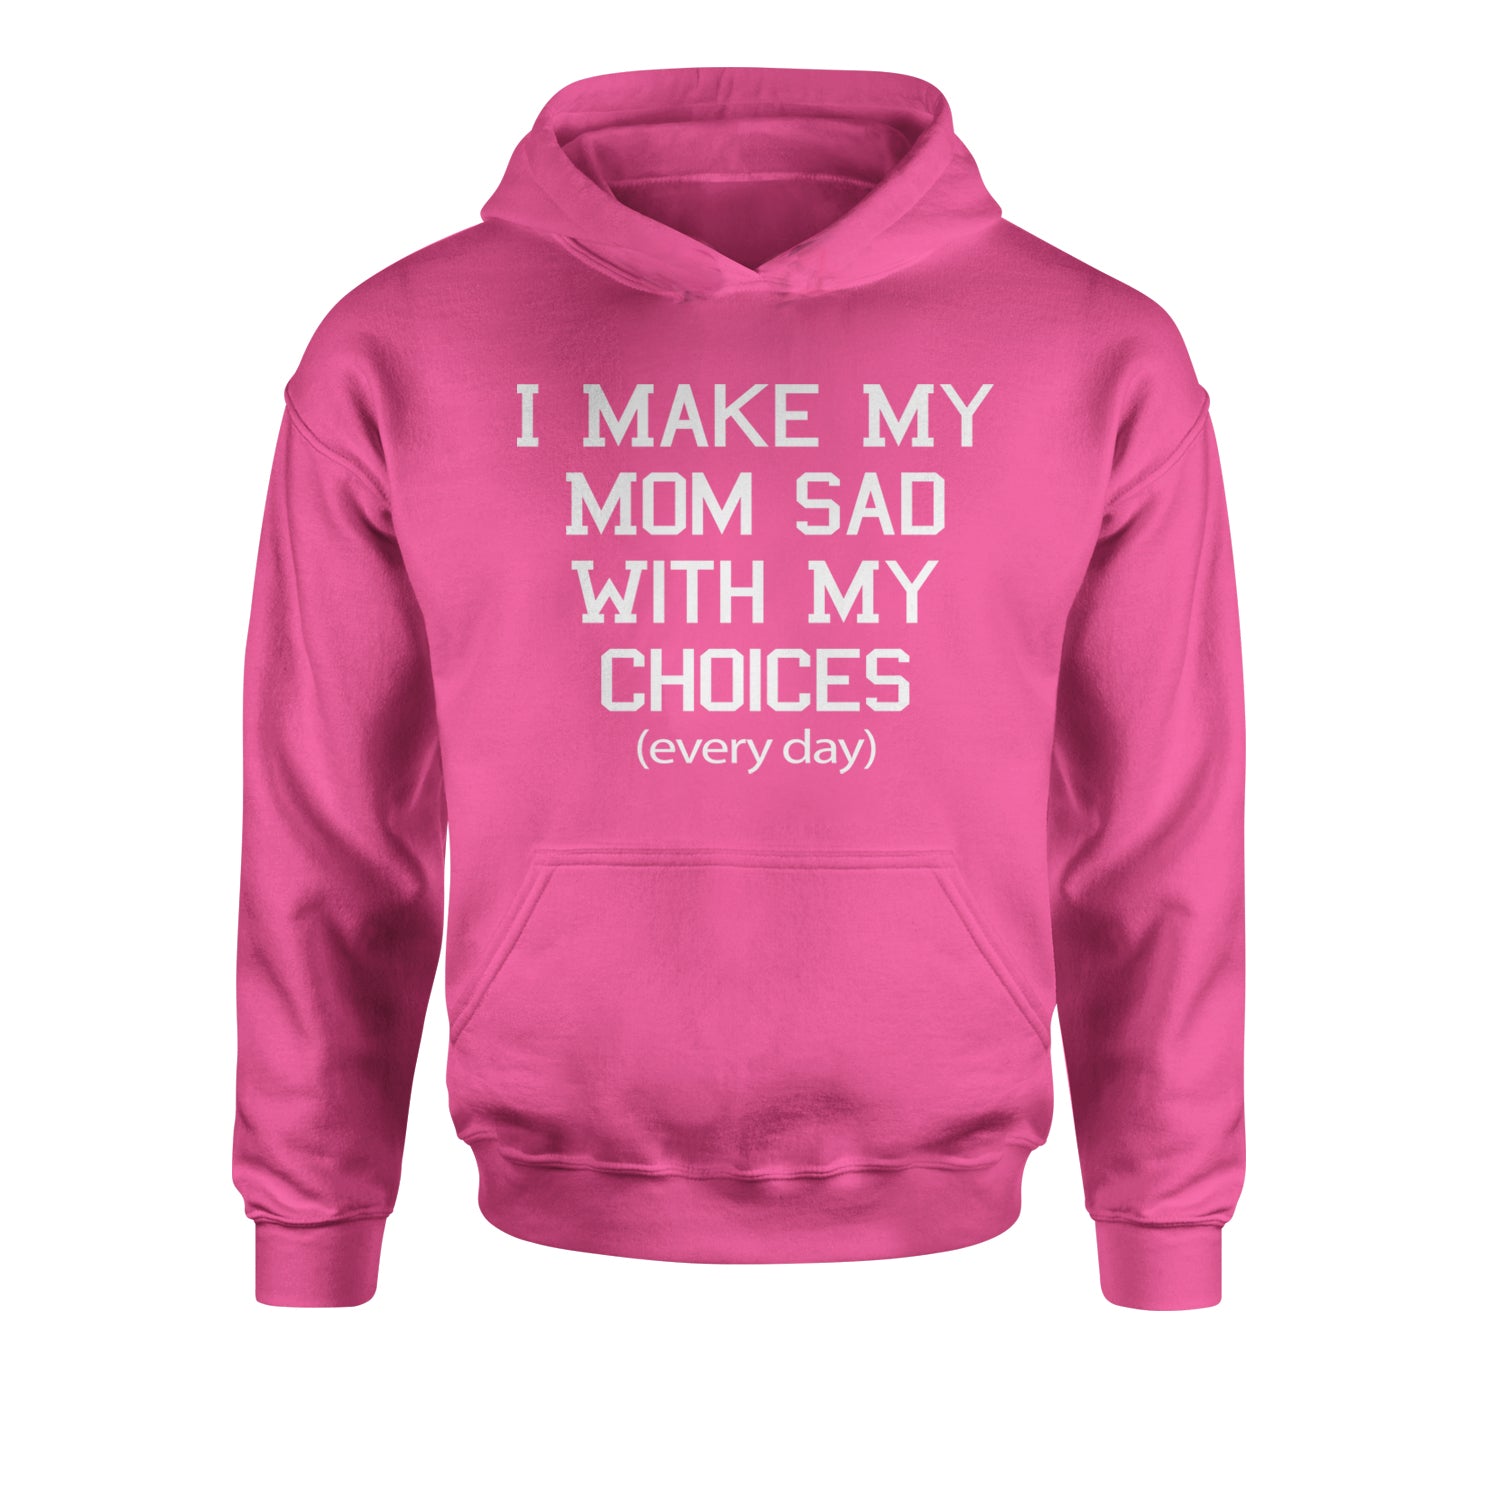 I Make My Mom Sad With My Choices Every Day Youth-Sized Hoodie funny, ironic, meme by Expression Tees